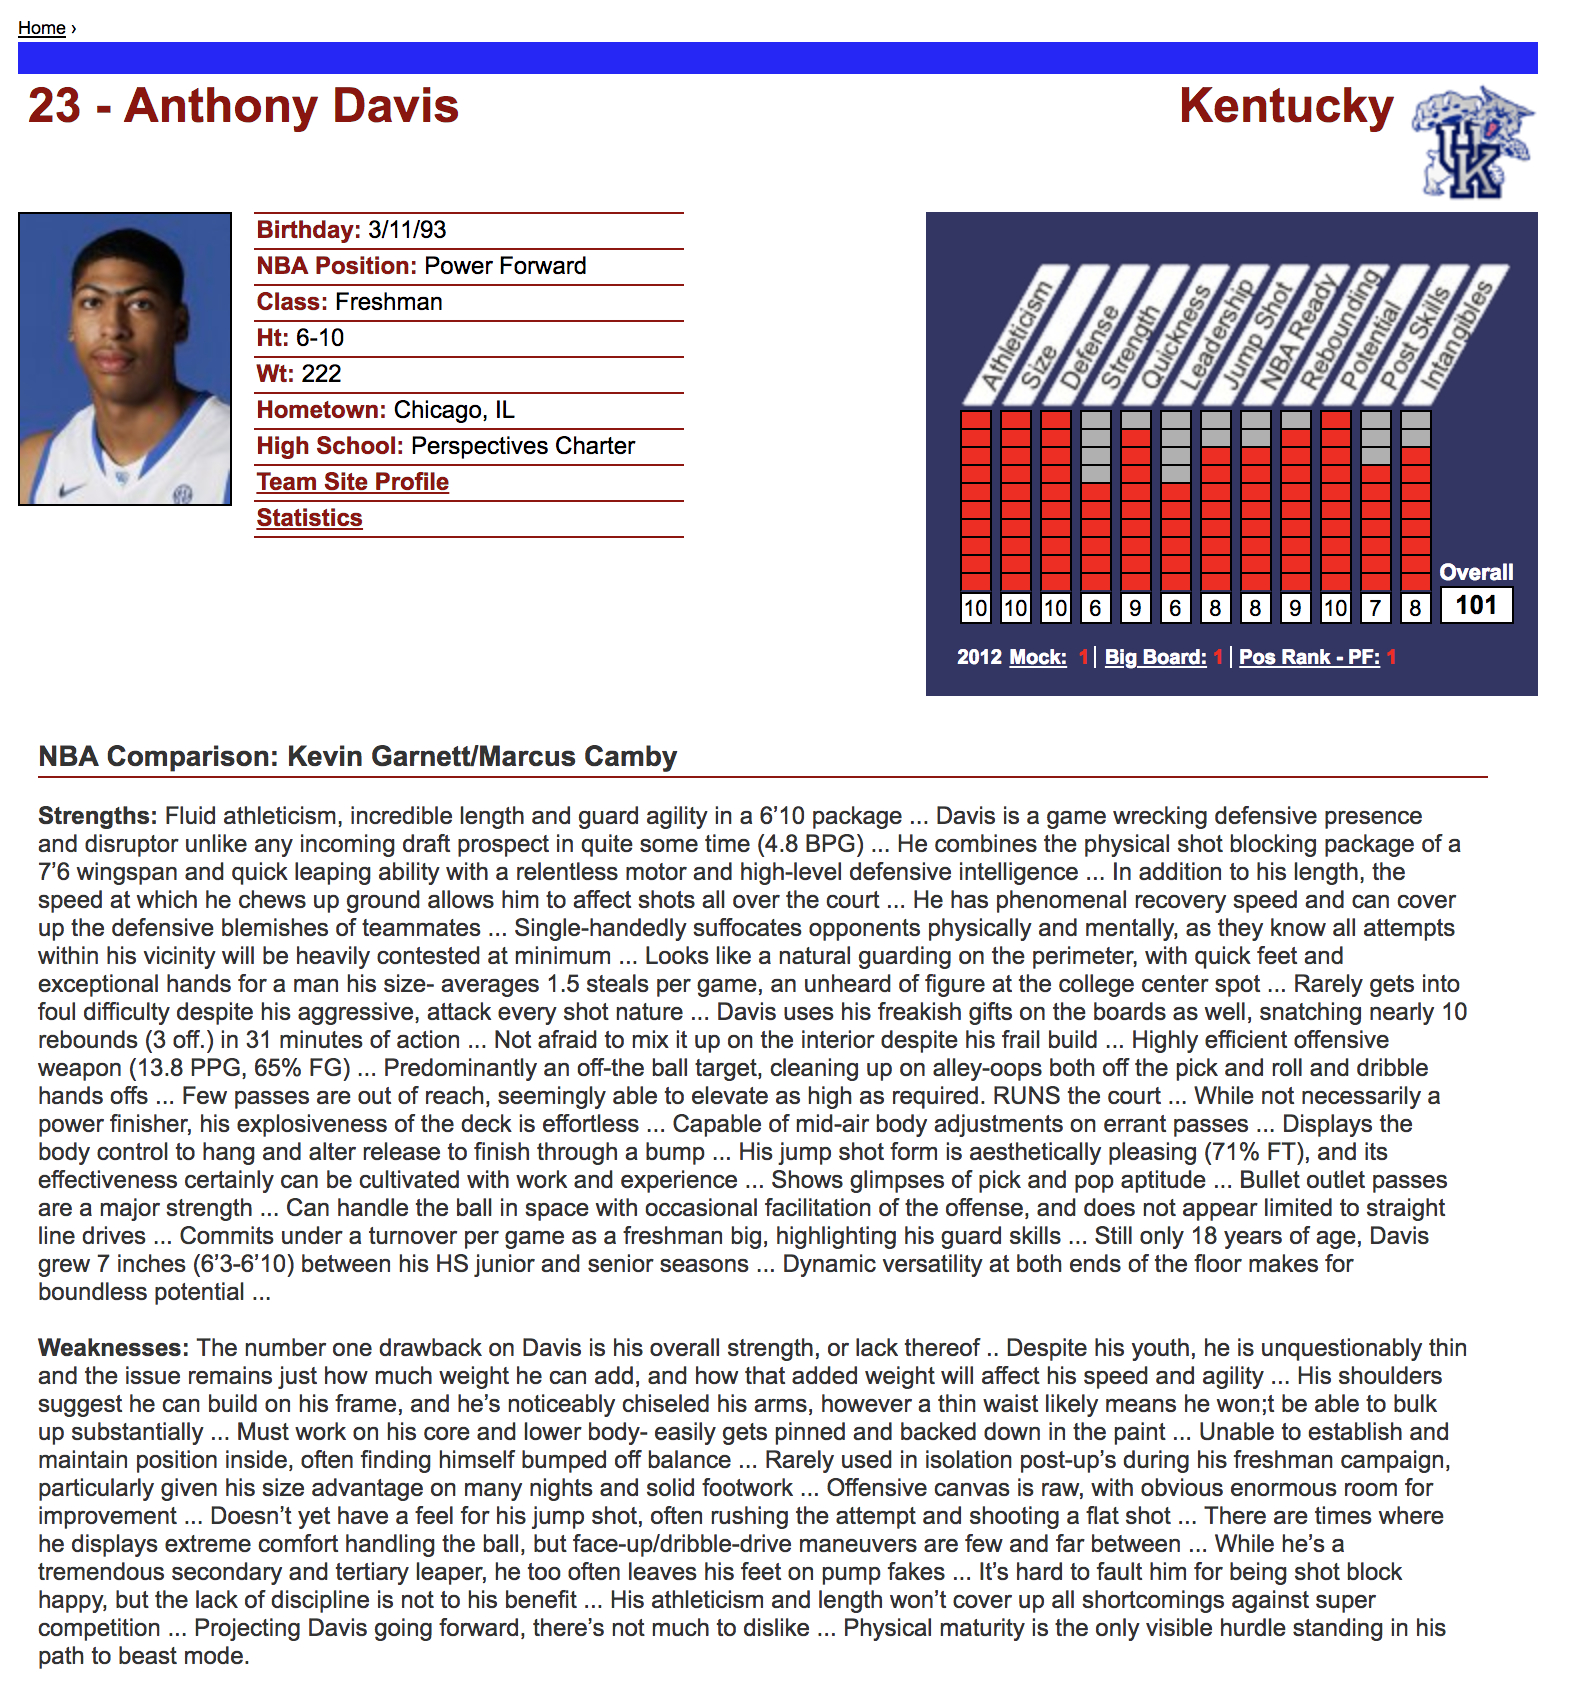 My Model Monday: Nba Draft Scouting Text Analysis | Model 284 With Basketball Player Scouting Report Template